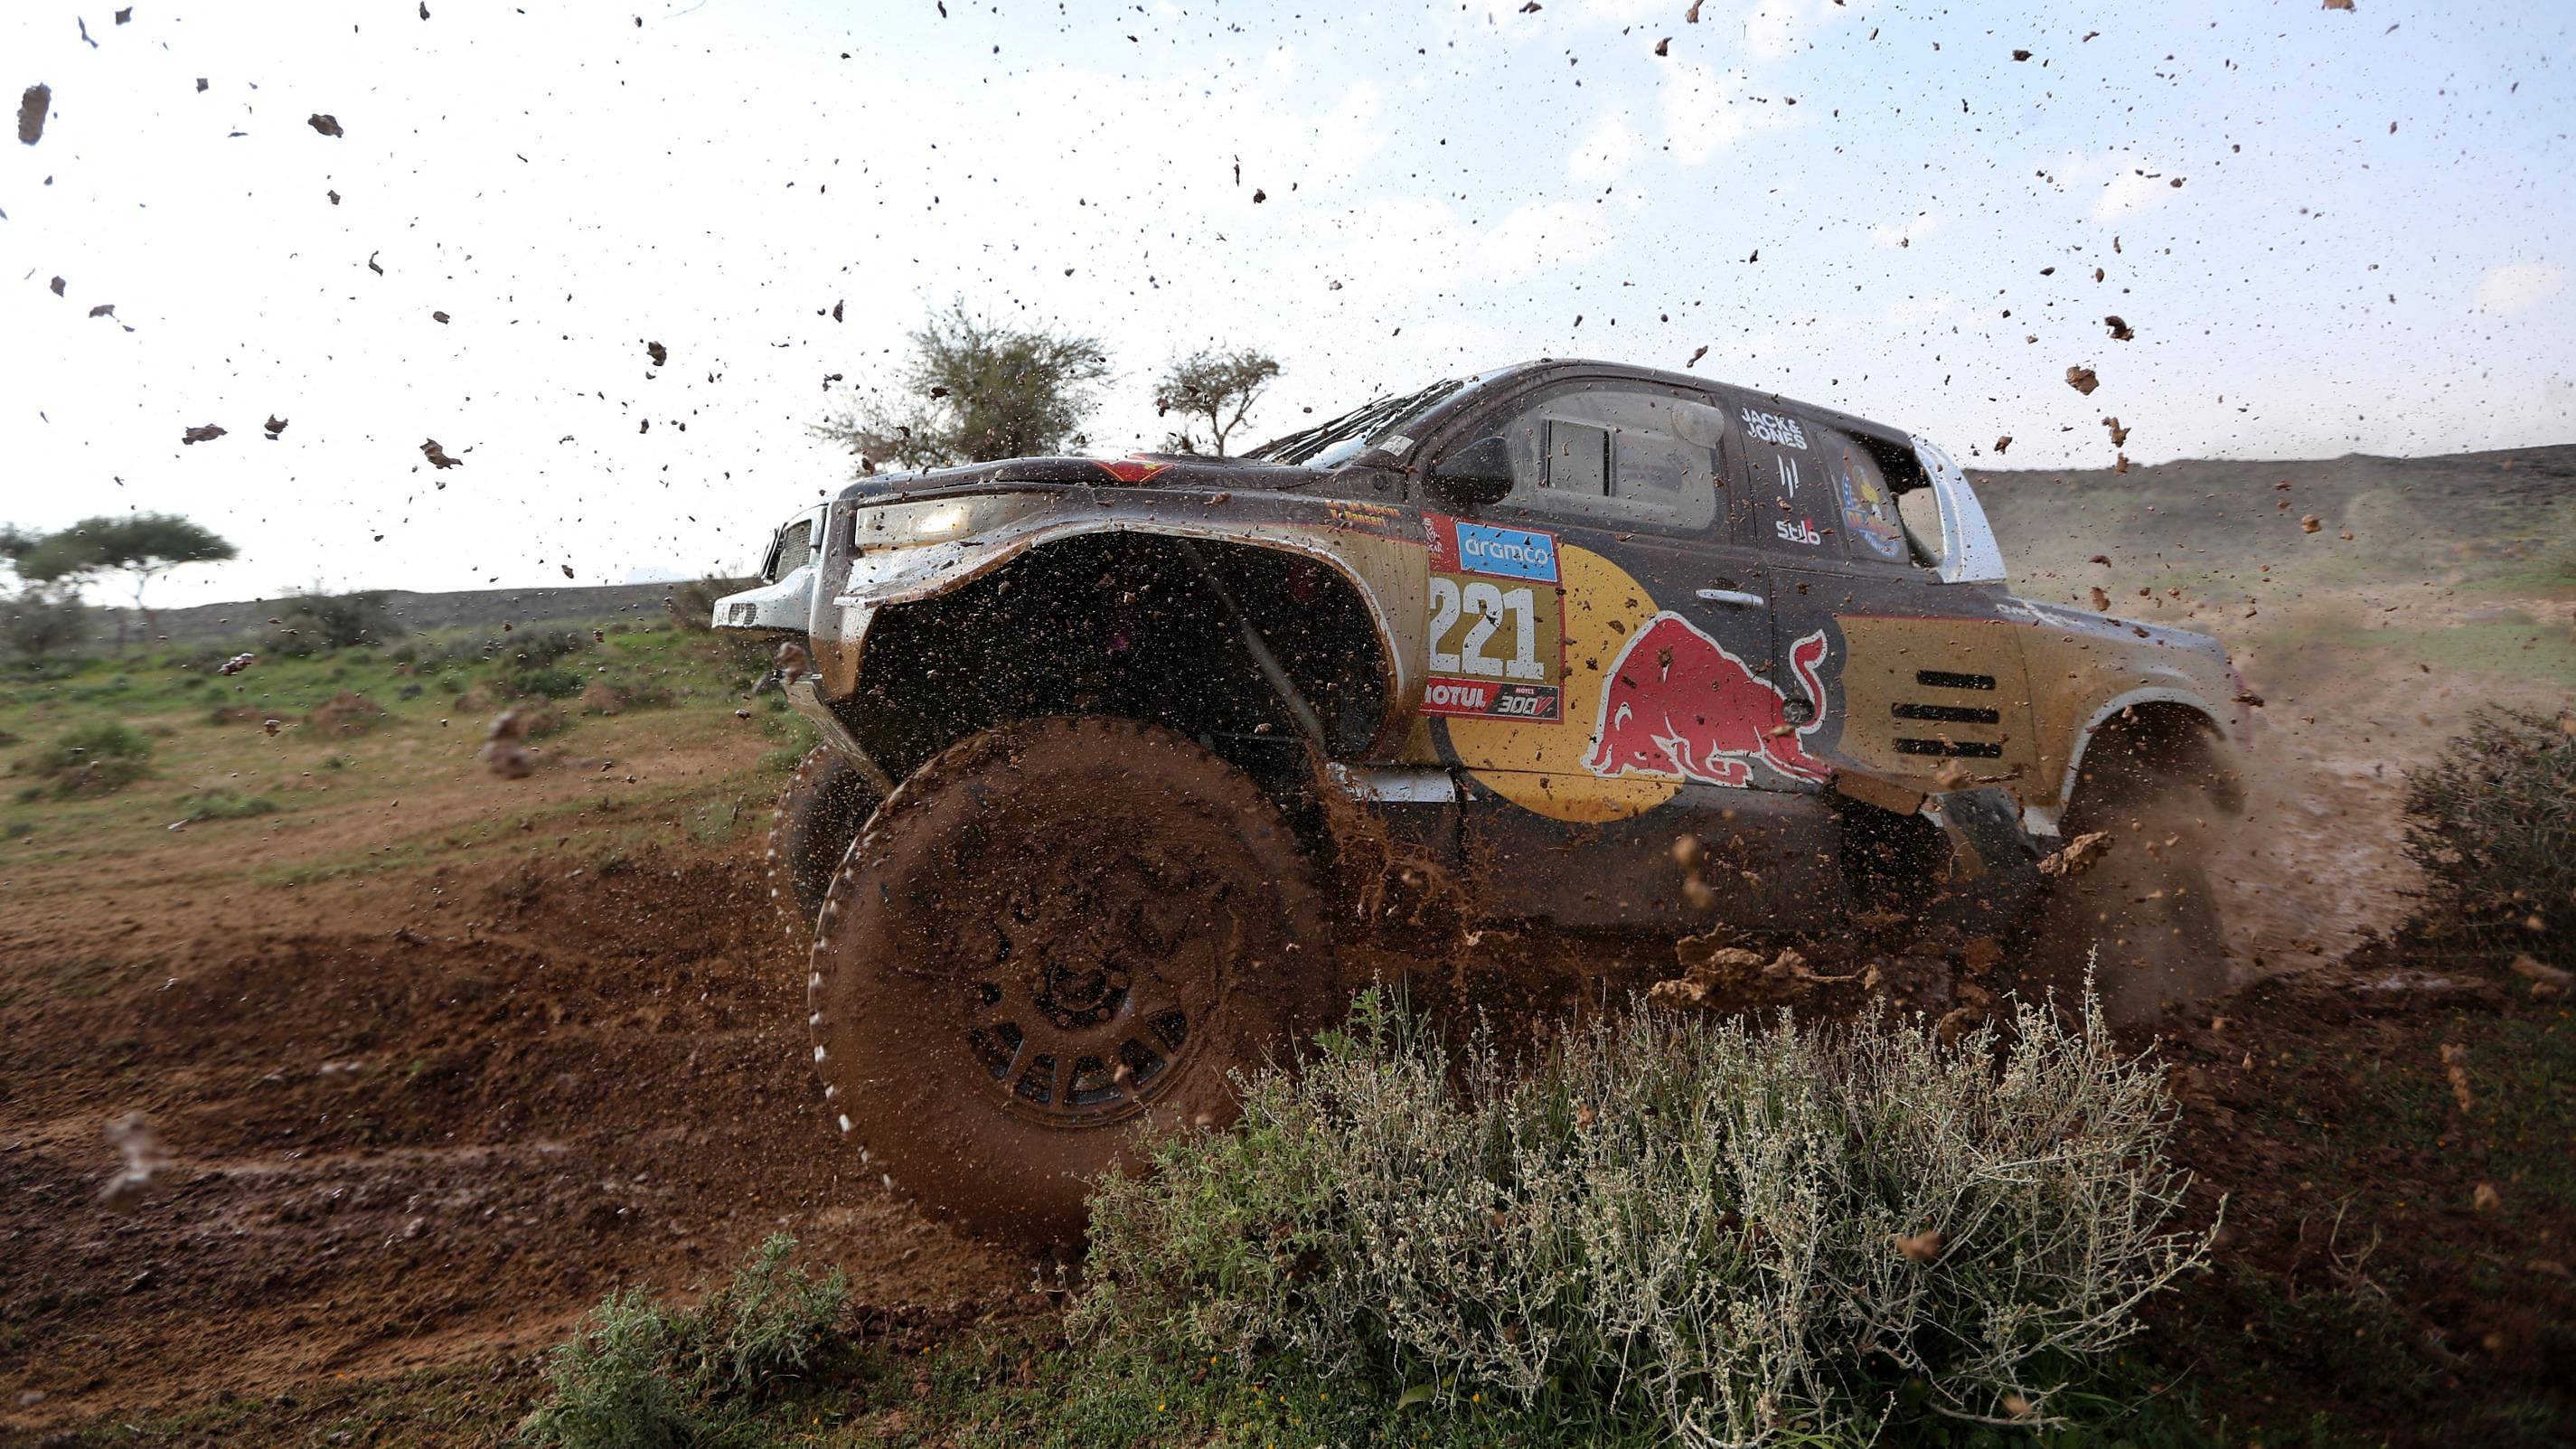 Dakar: Guillaume de Mevius wins the 1st stage in the car, Ross Branch in the motorcycle